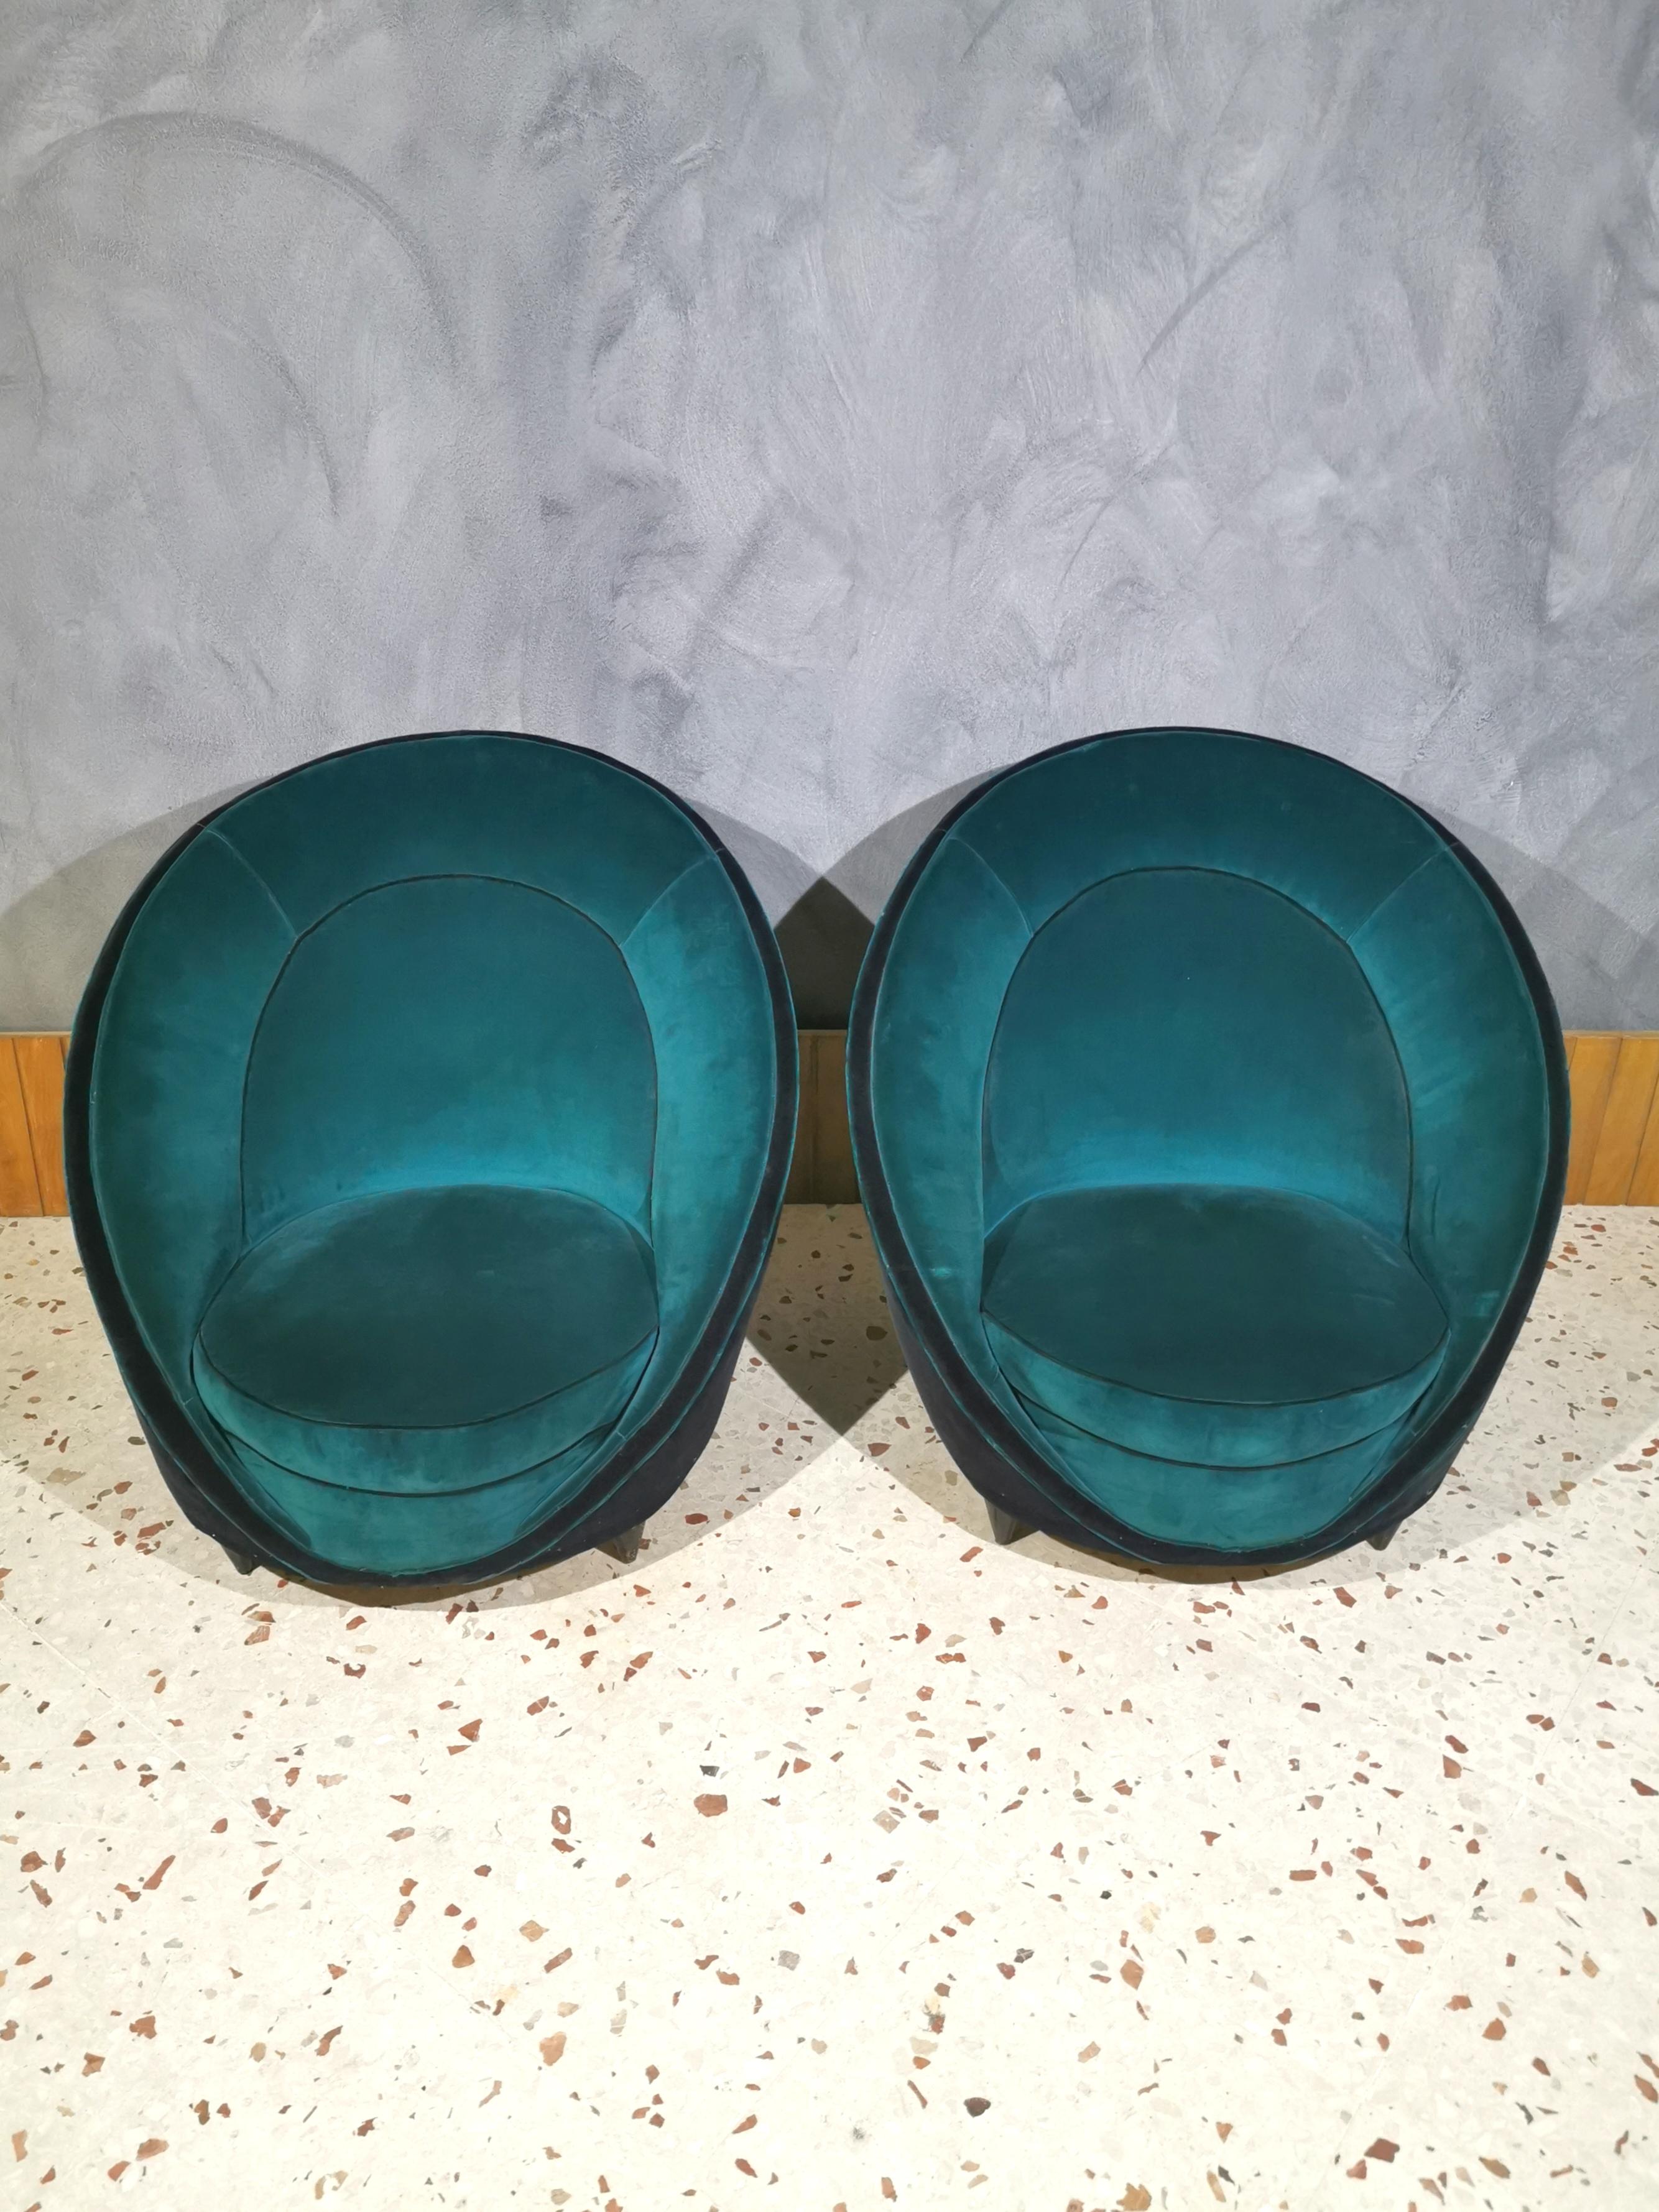 Unique and rare armchairs by the designer Gio Ponti, from the 1950s. Shape and elegance are part of these two-tone velvet seats and conical wooden feet, all original from the period. Set of 2.